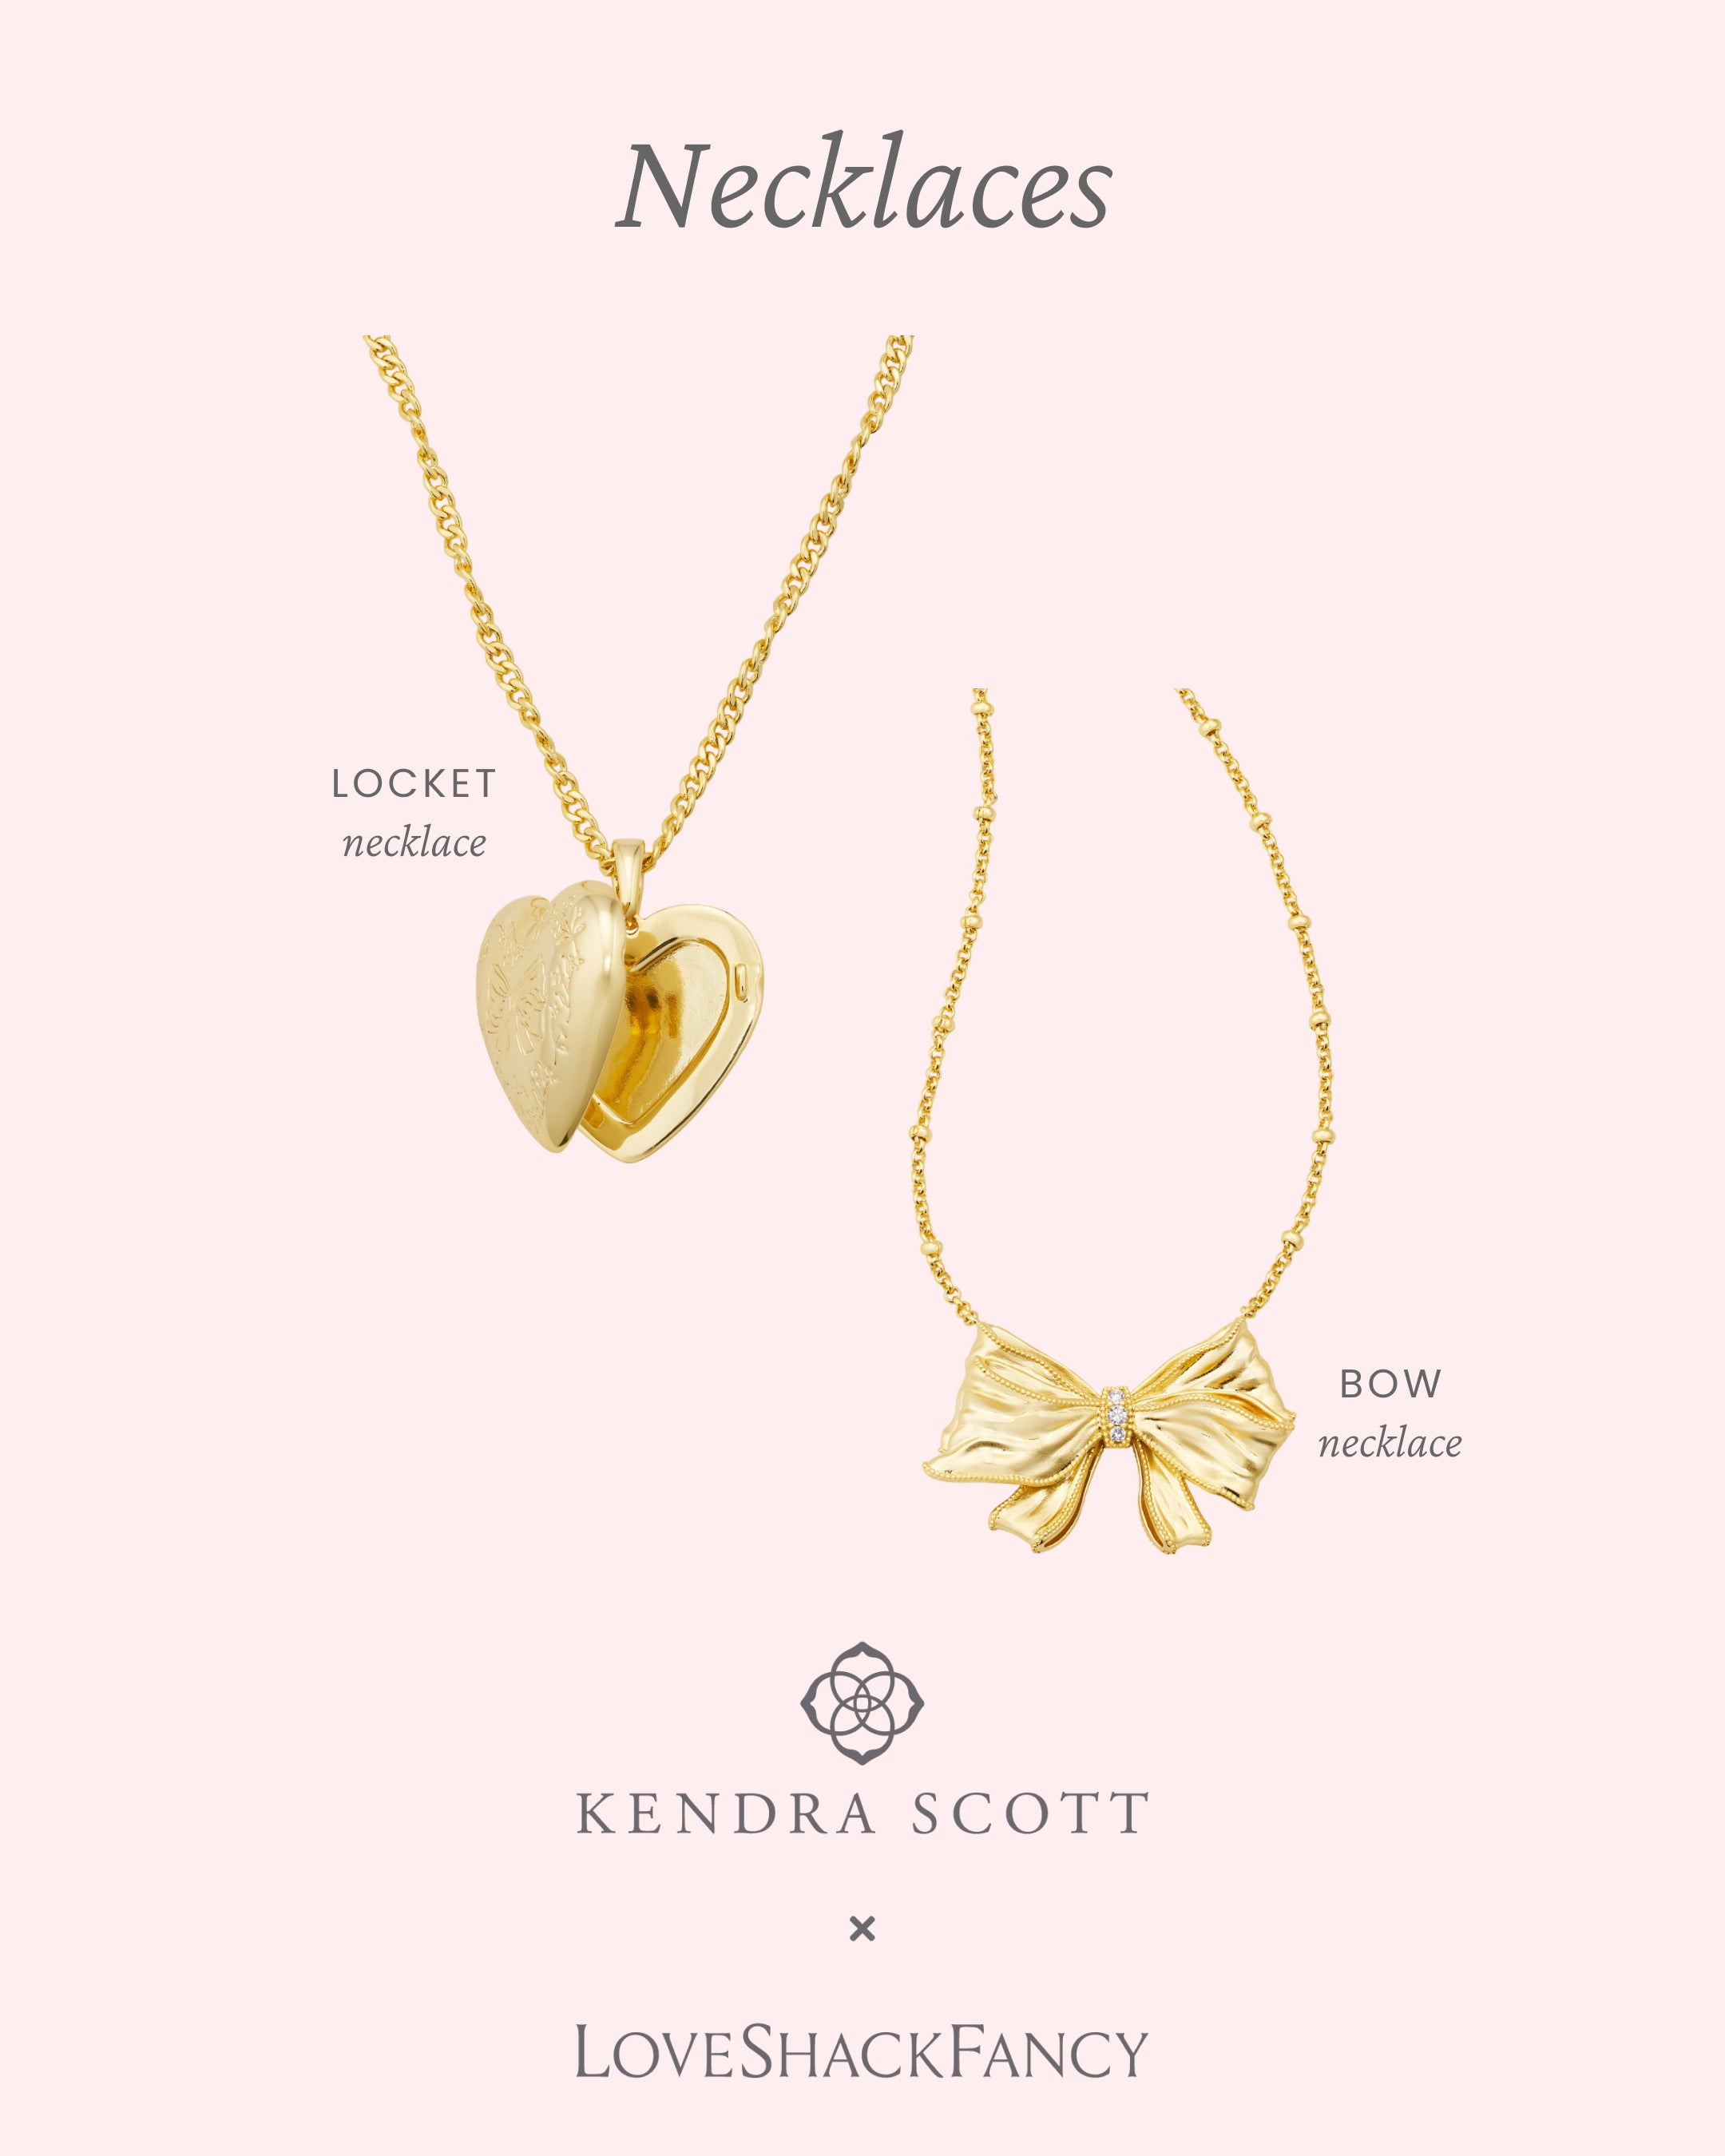 The gold Locket and Bow Necklaces from the Kendra Scott x LoveShackFancy collaboration